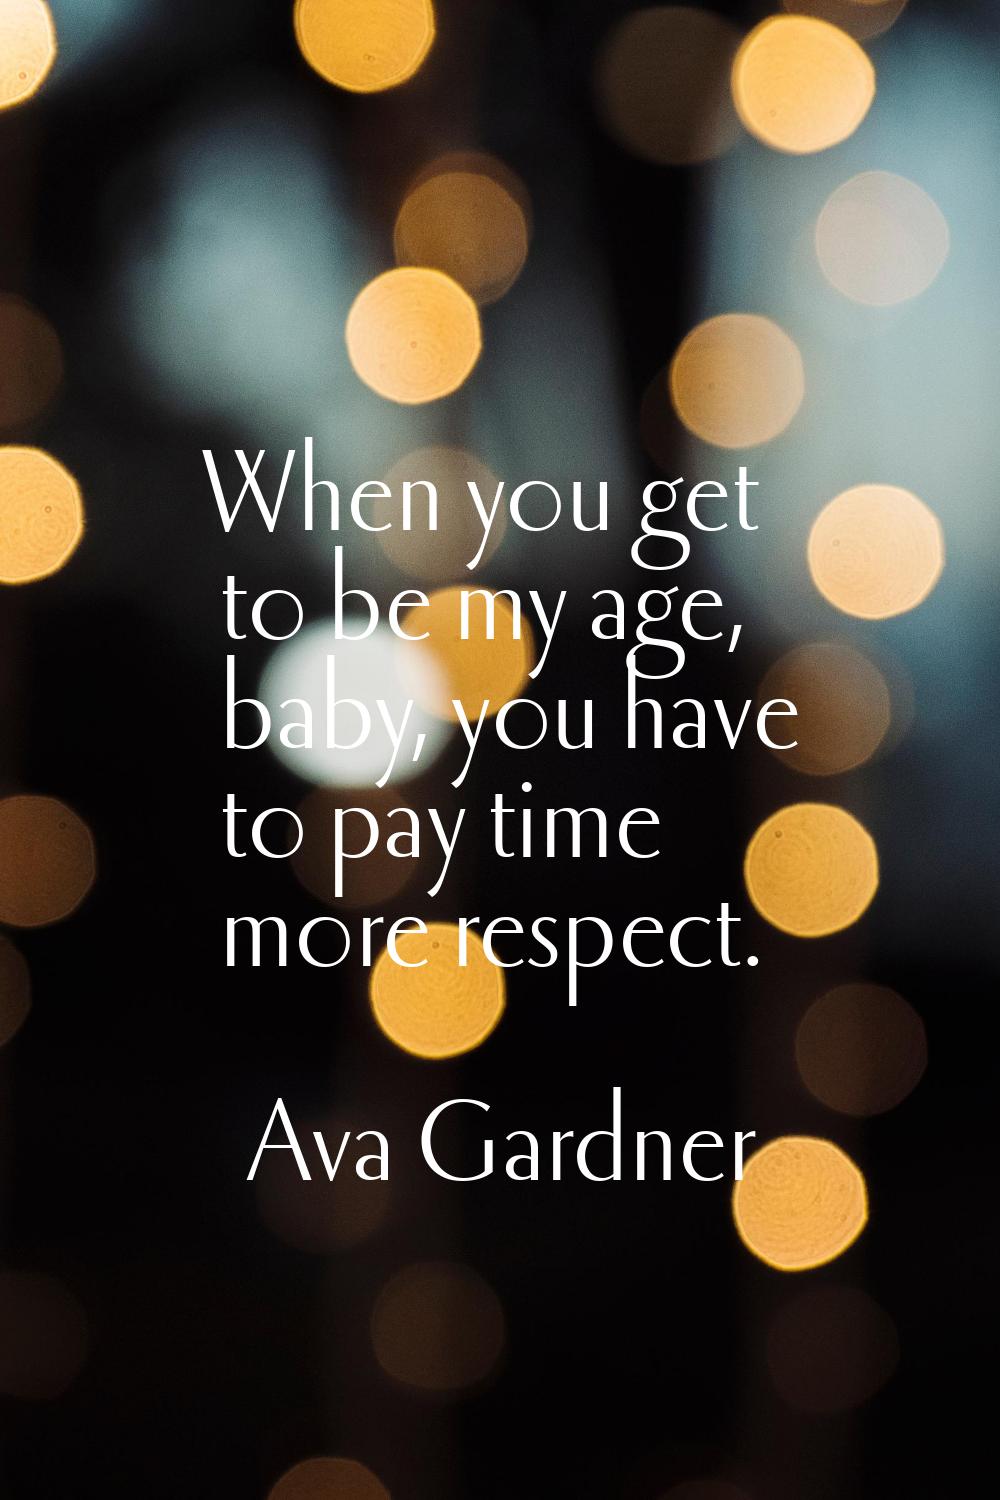 When you get to be my age, baby, you have to pay time more respect.